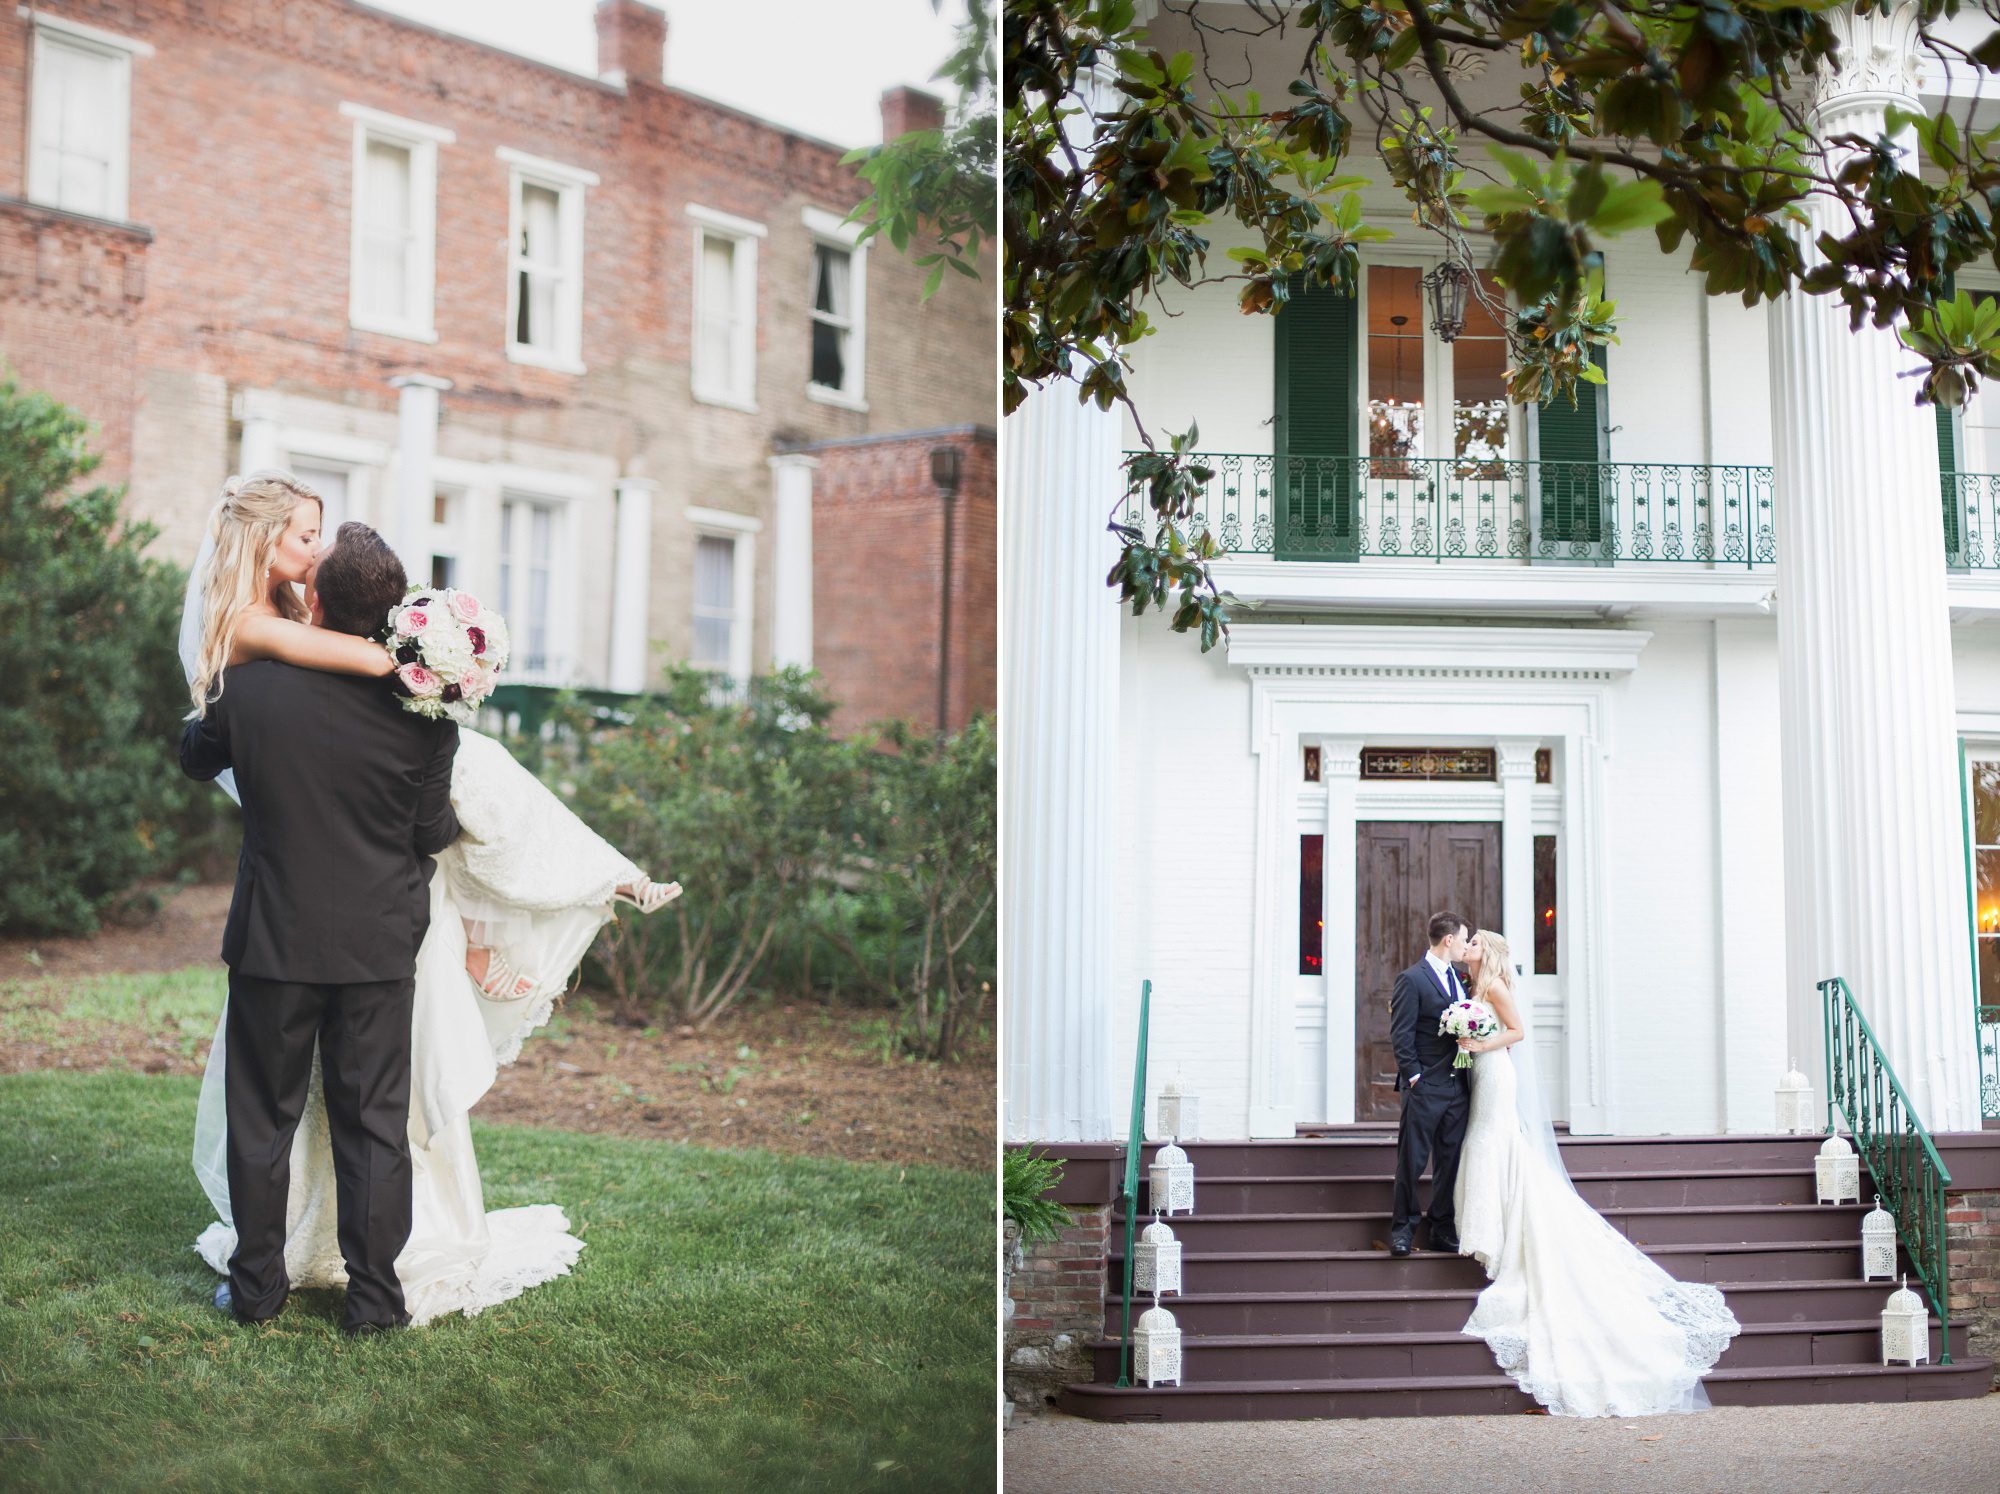 Bride and groom on steps of mansion at Riverwood Mansion in Nashville, Tennessee. Photography by Krista Lee.